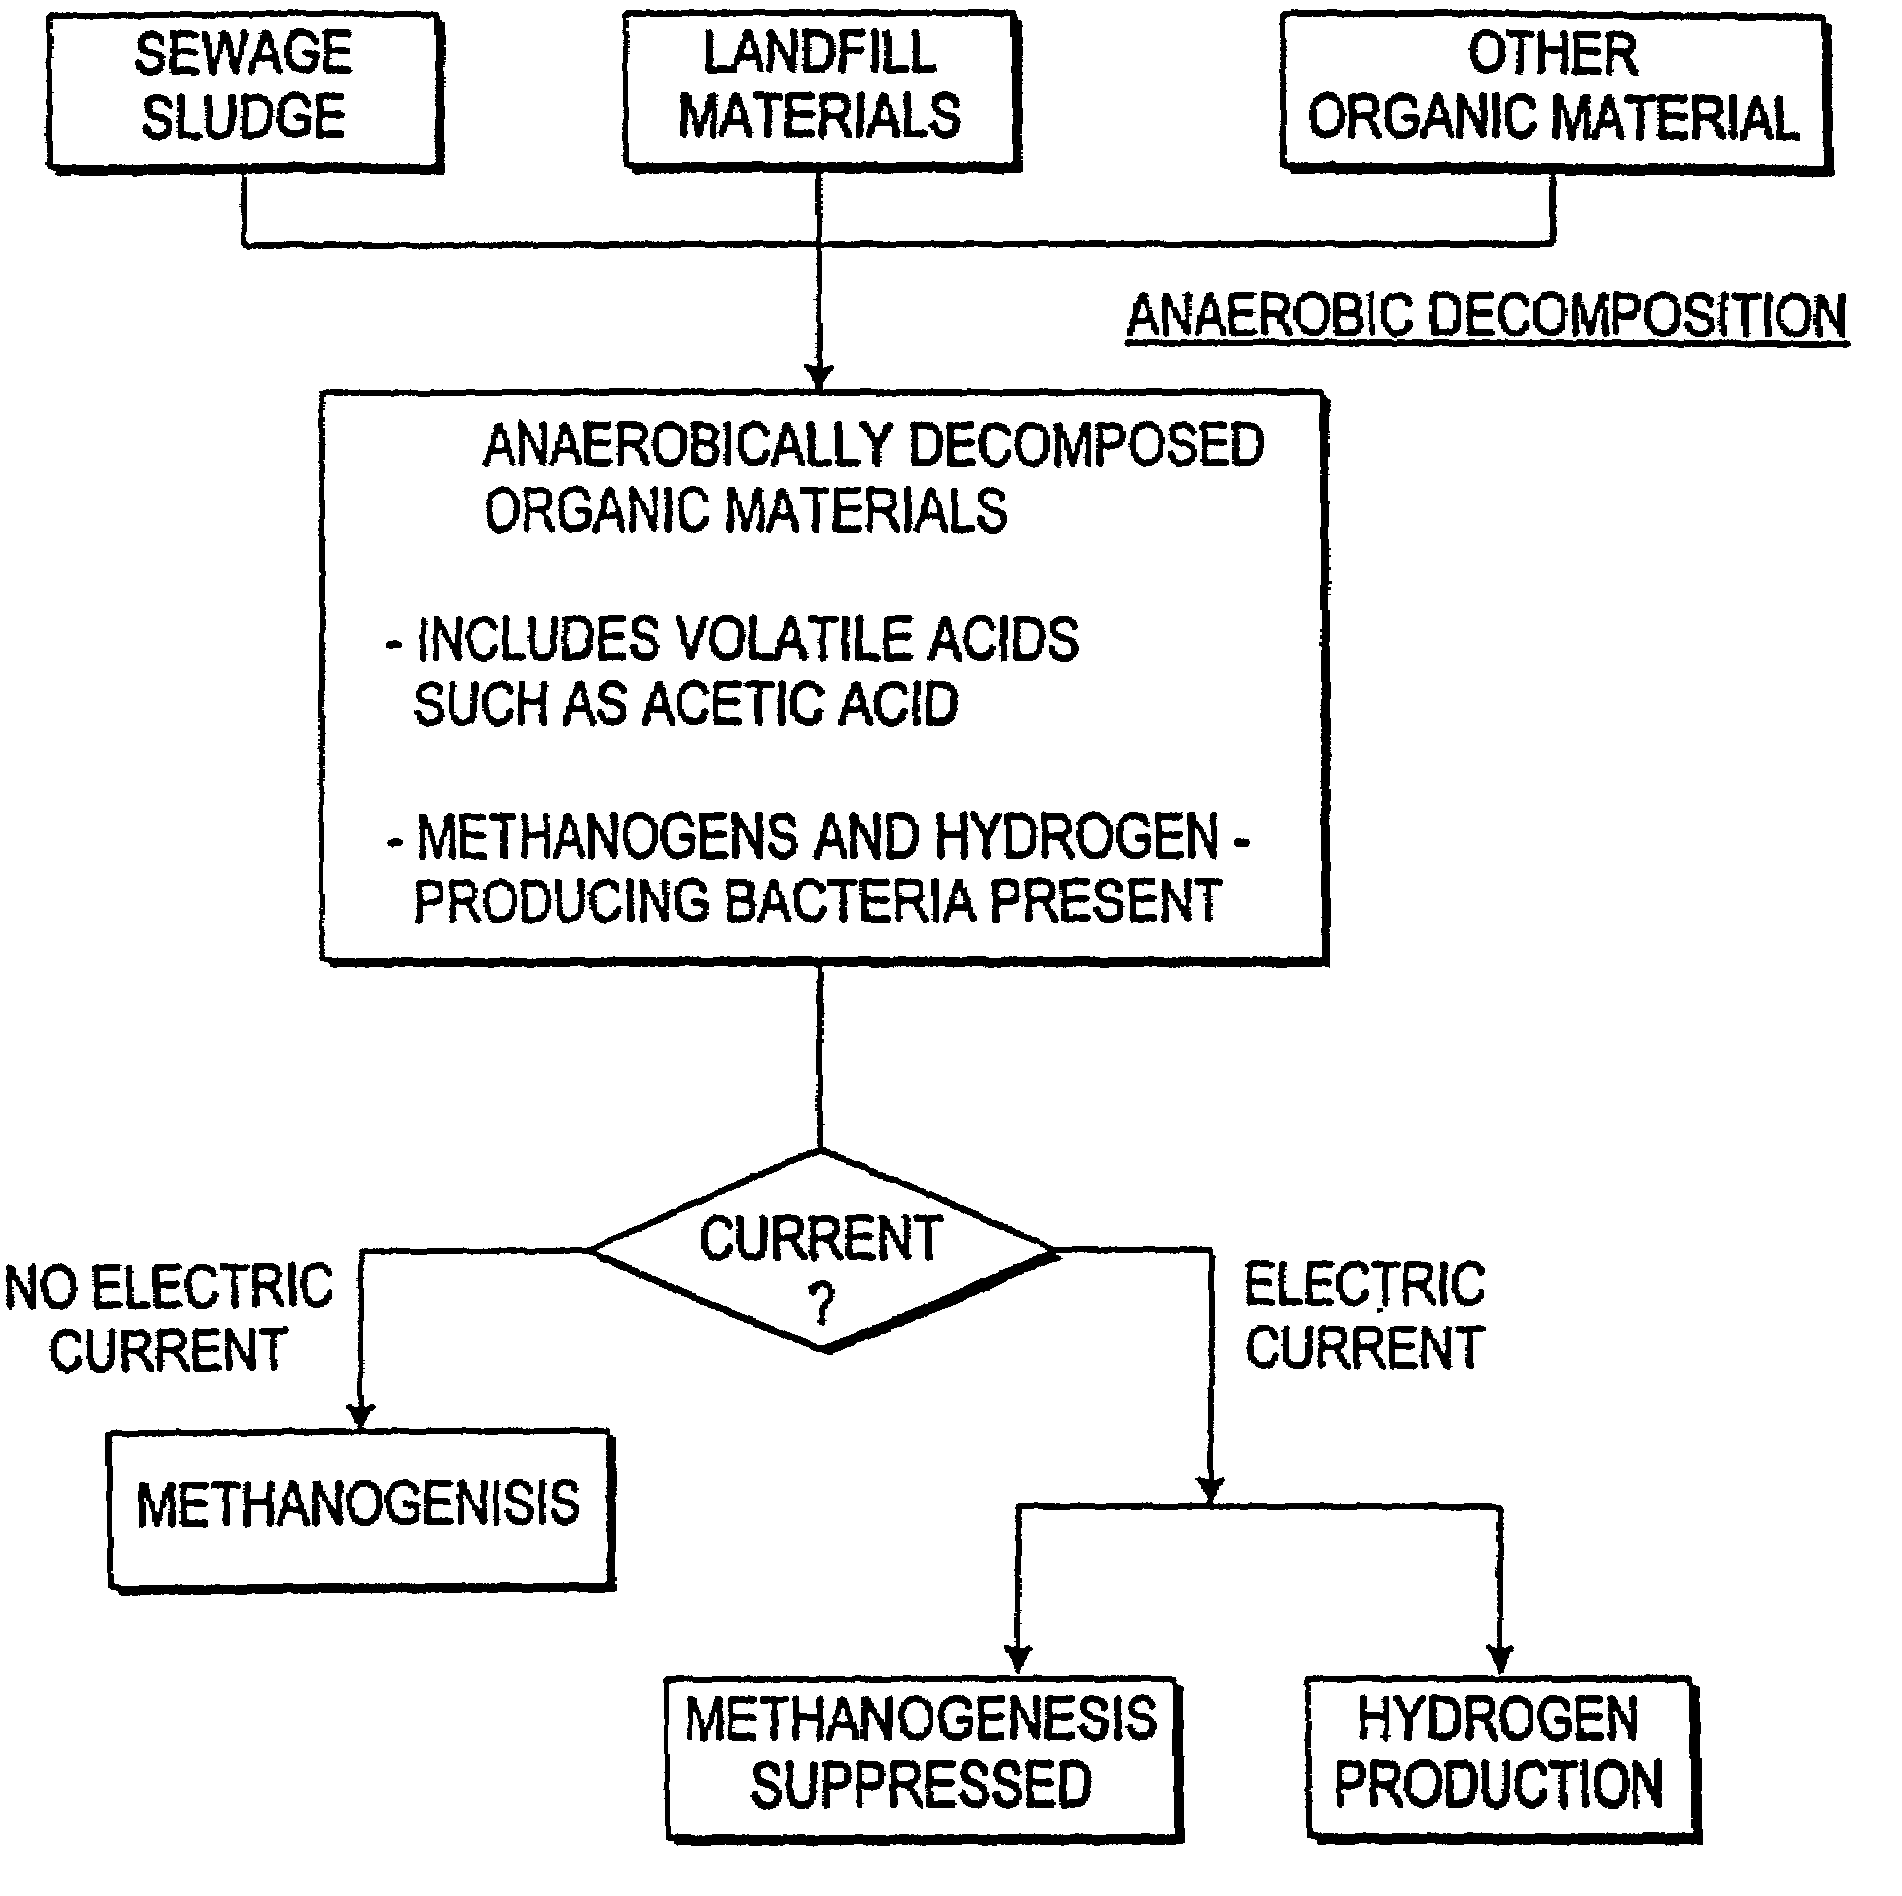 Process for production of hydrogen from anaerobically decomposed organic materials